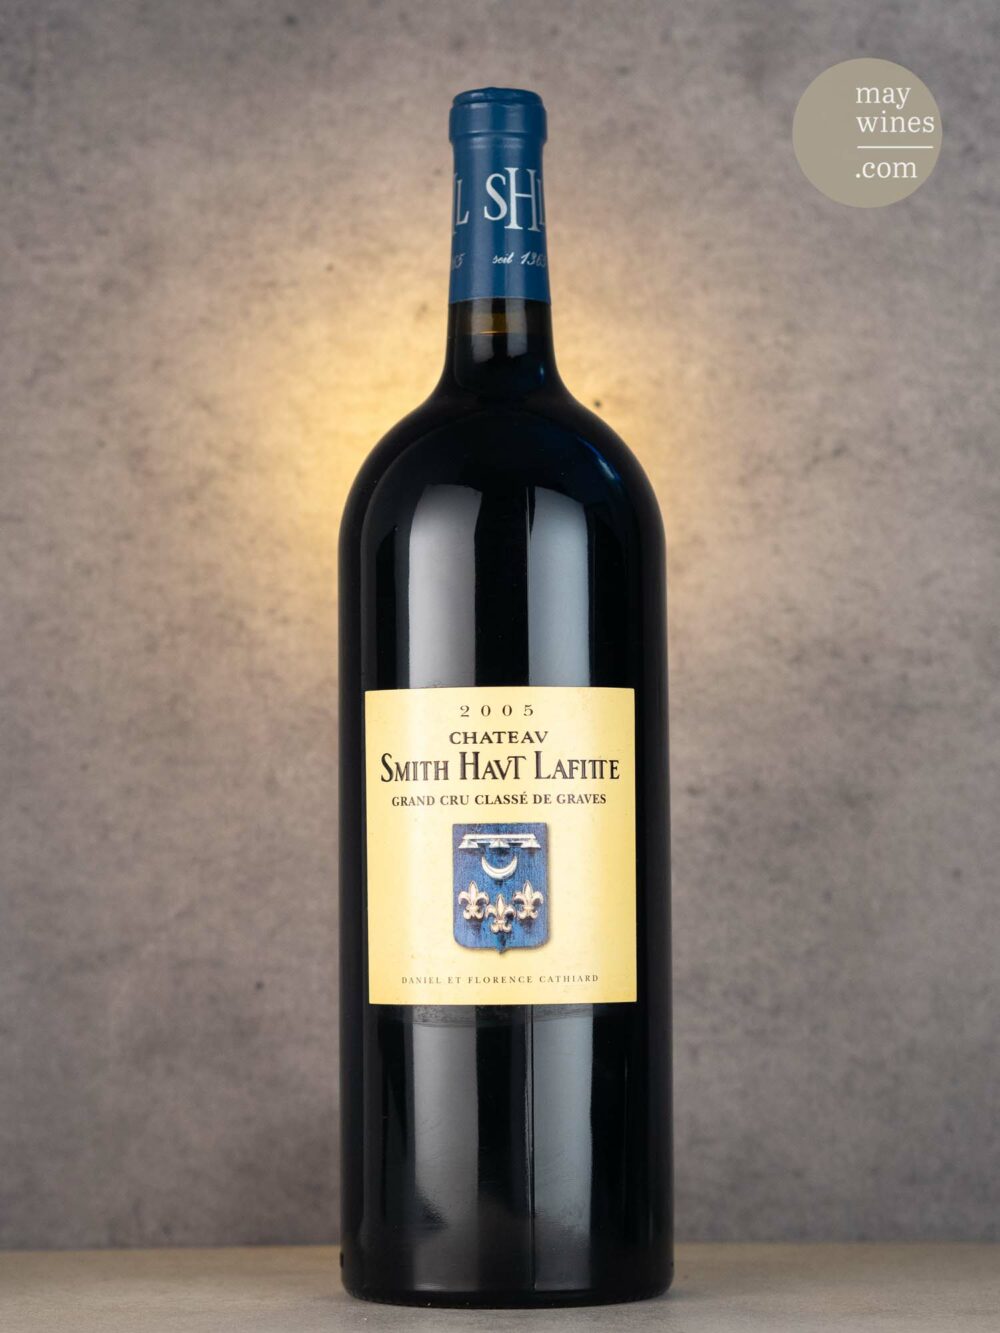 May Wines – Rotwein – 2005 Château Smith Haut Lafitte